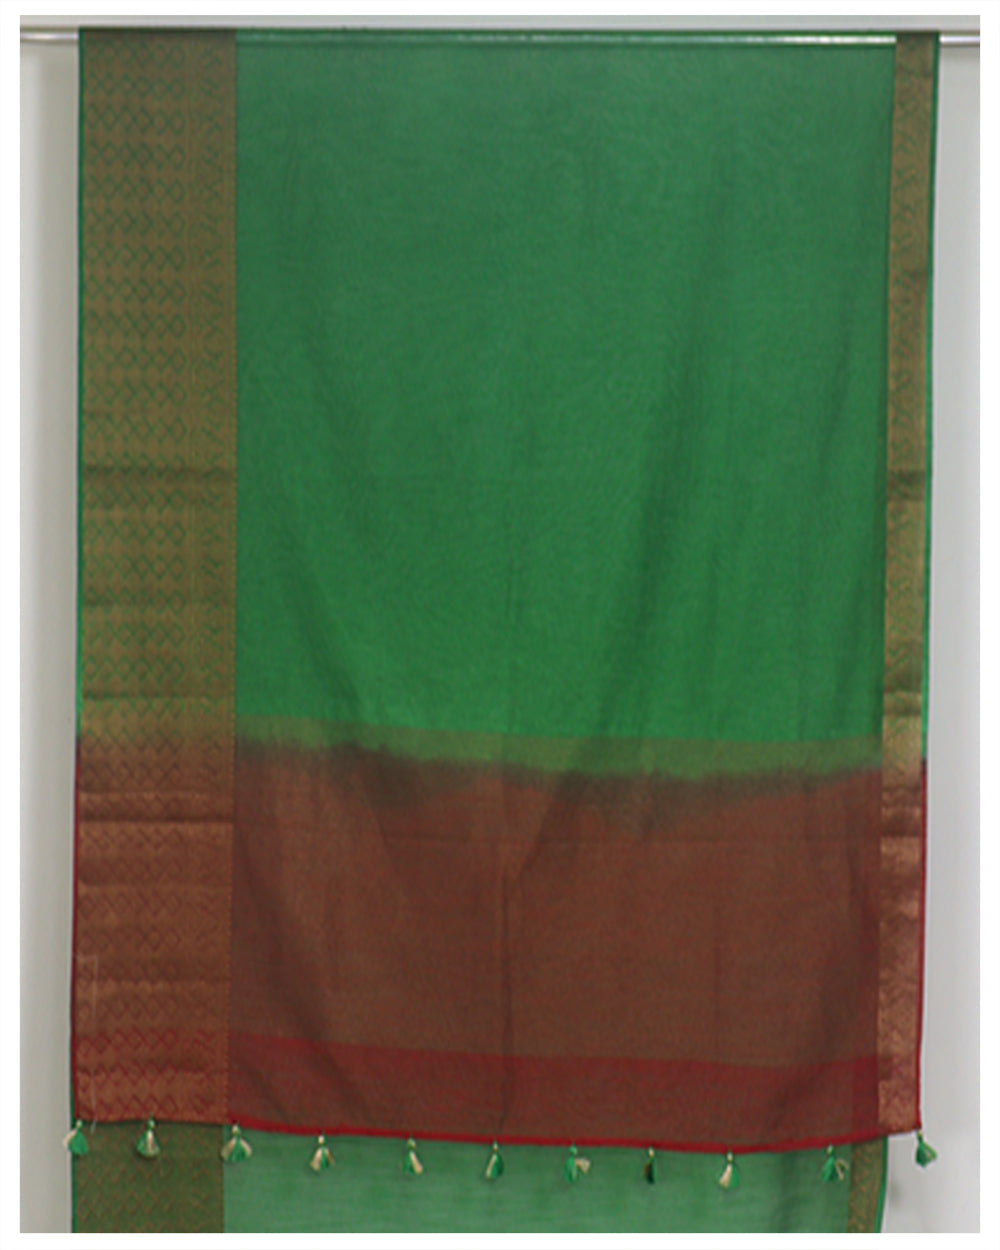 Green colour semi jute saree for party wear and casual wear Sarees sreevalsamsilks